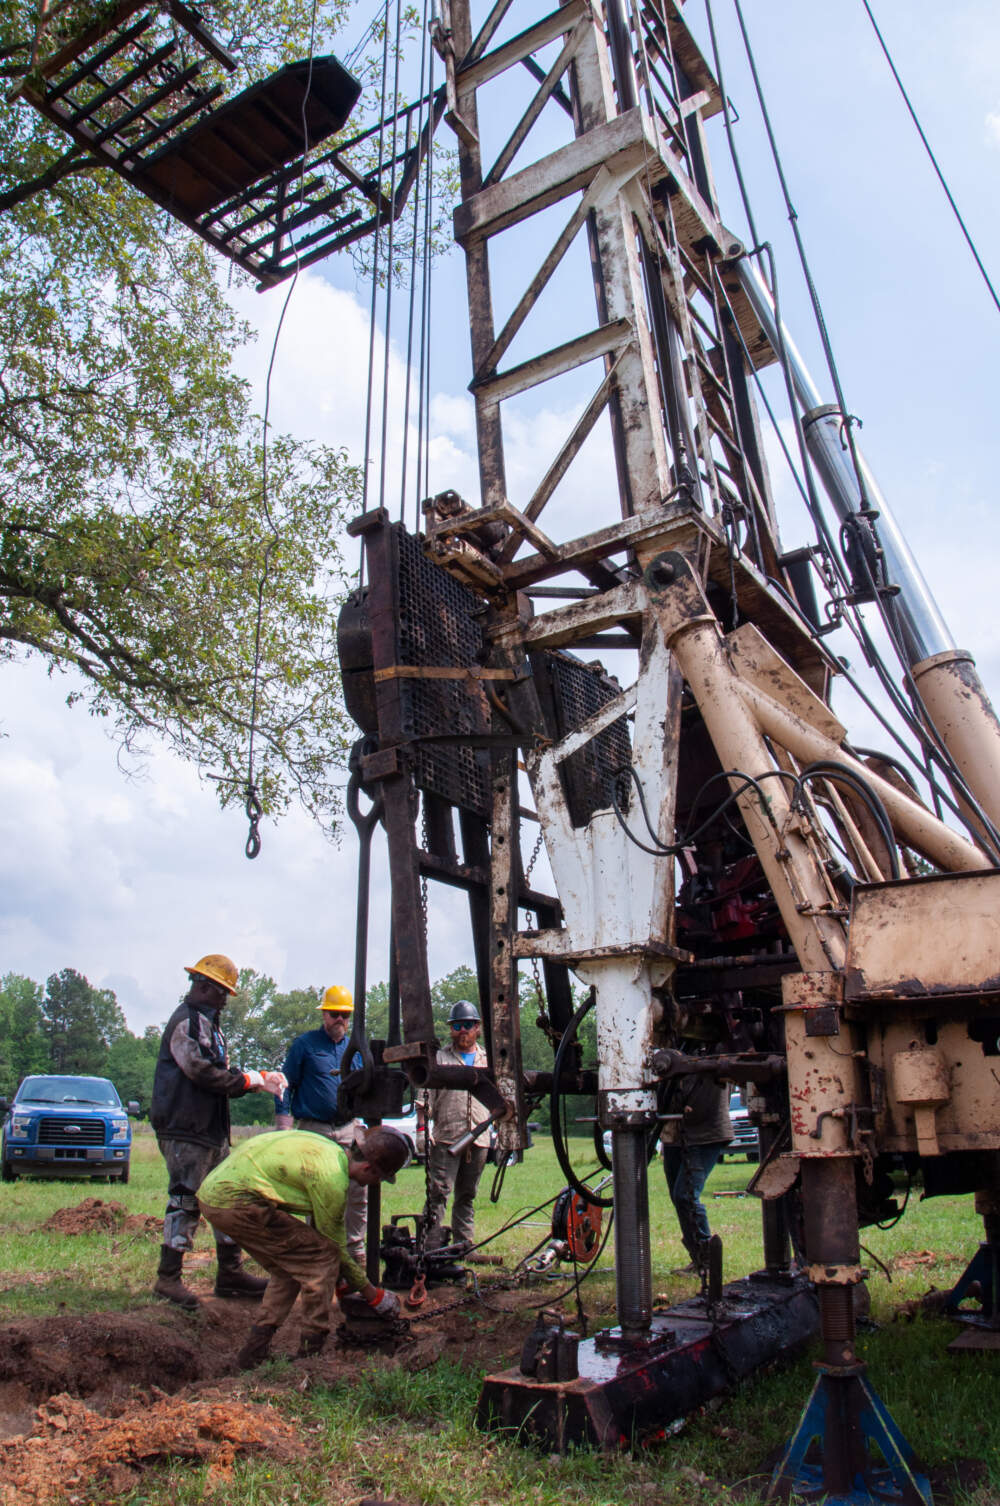 Workers cap an “orphaned” well in Greenwood, Louisiana that hasn’t produced any oil or gas in more than a decade. (Chris Bentley/Here & Now)